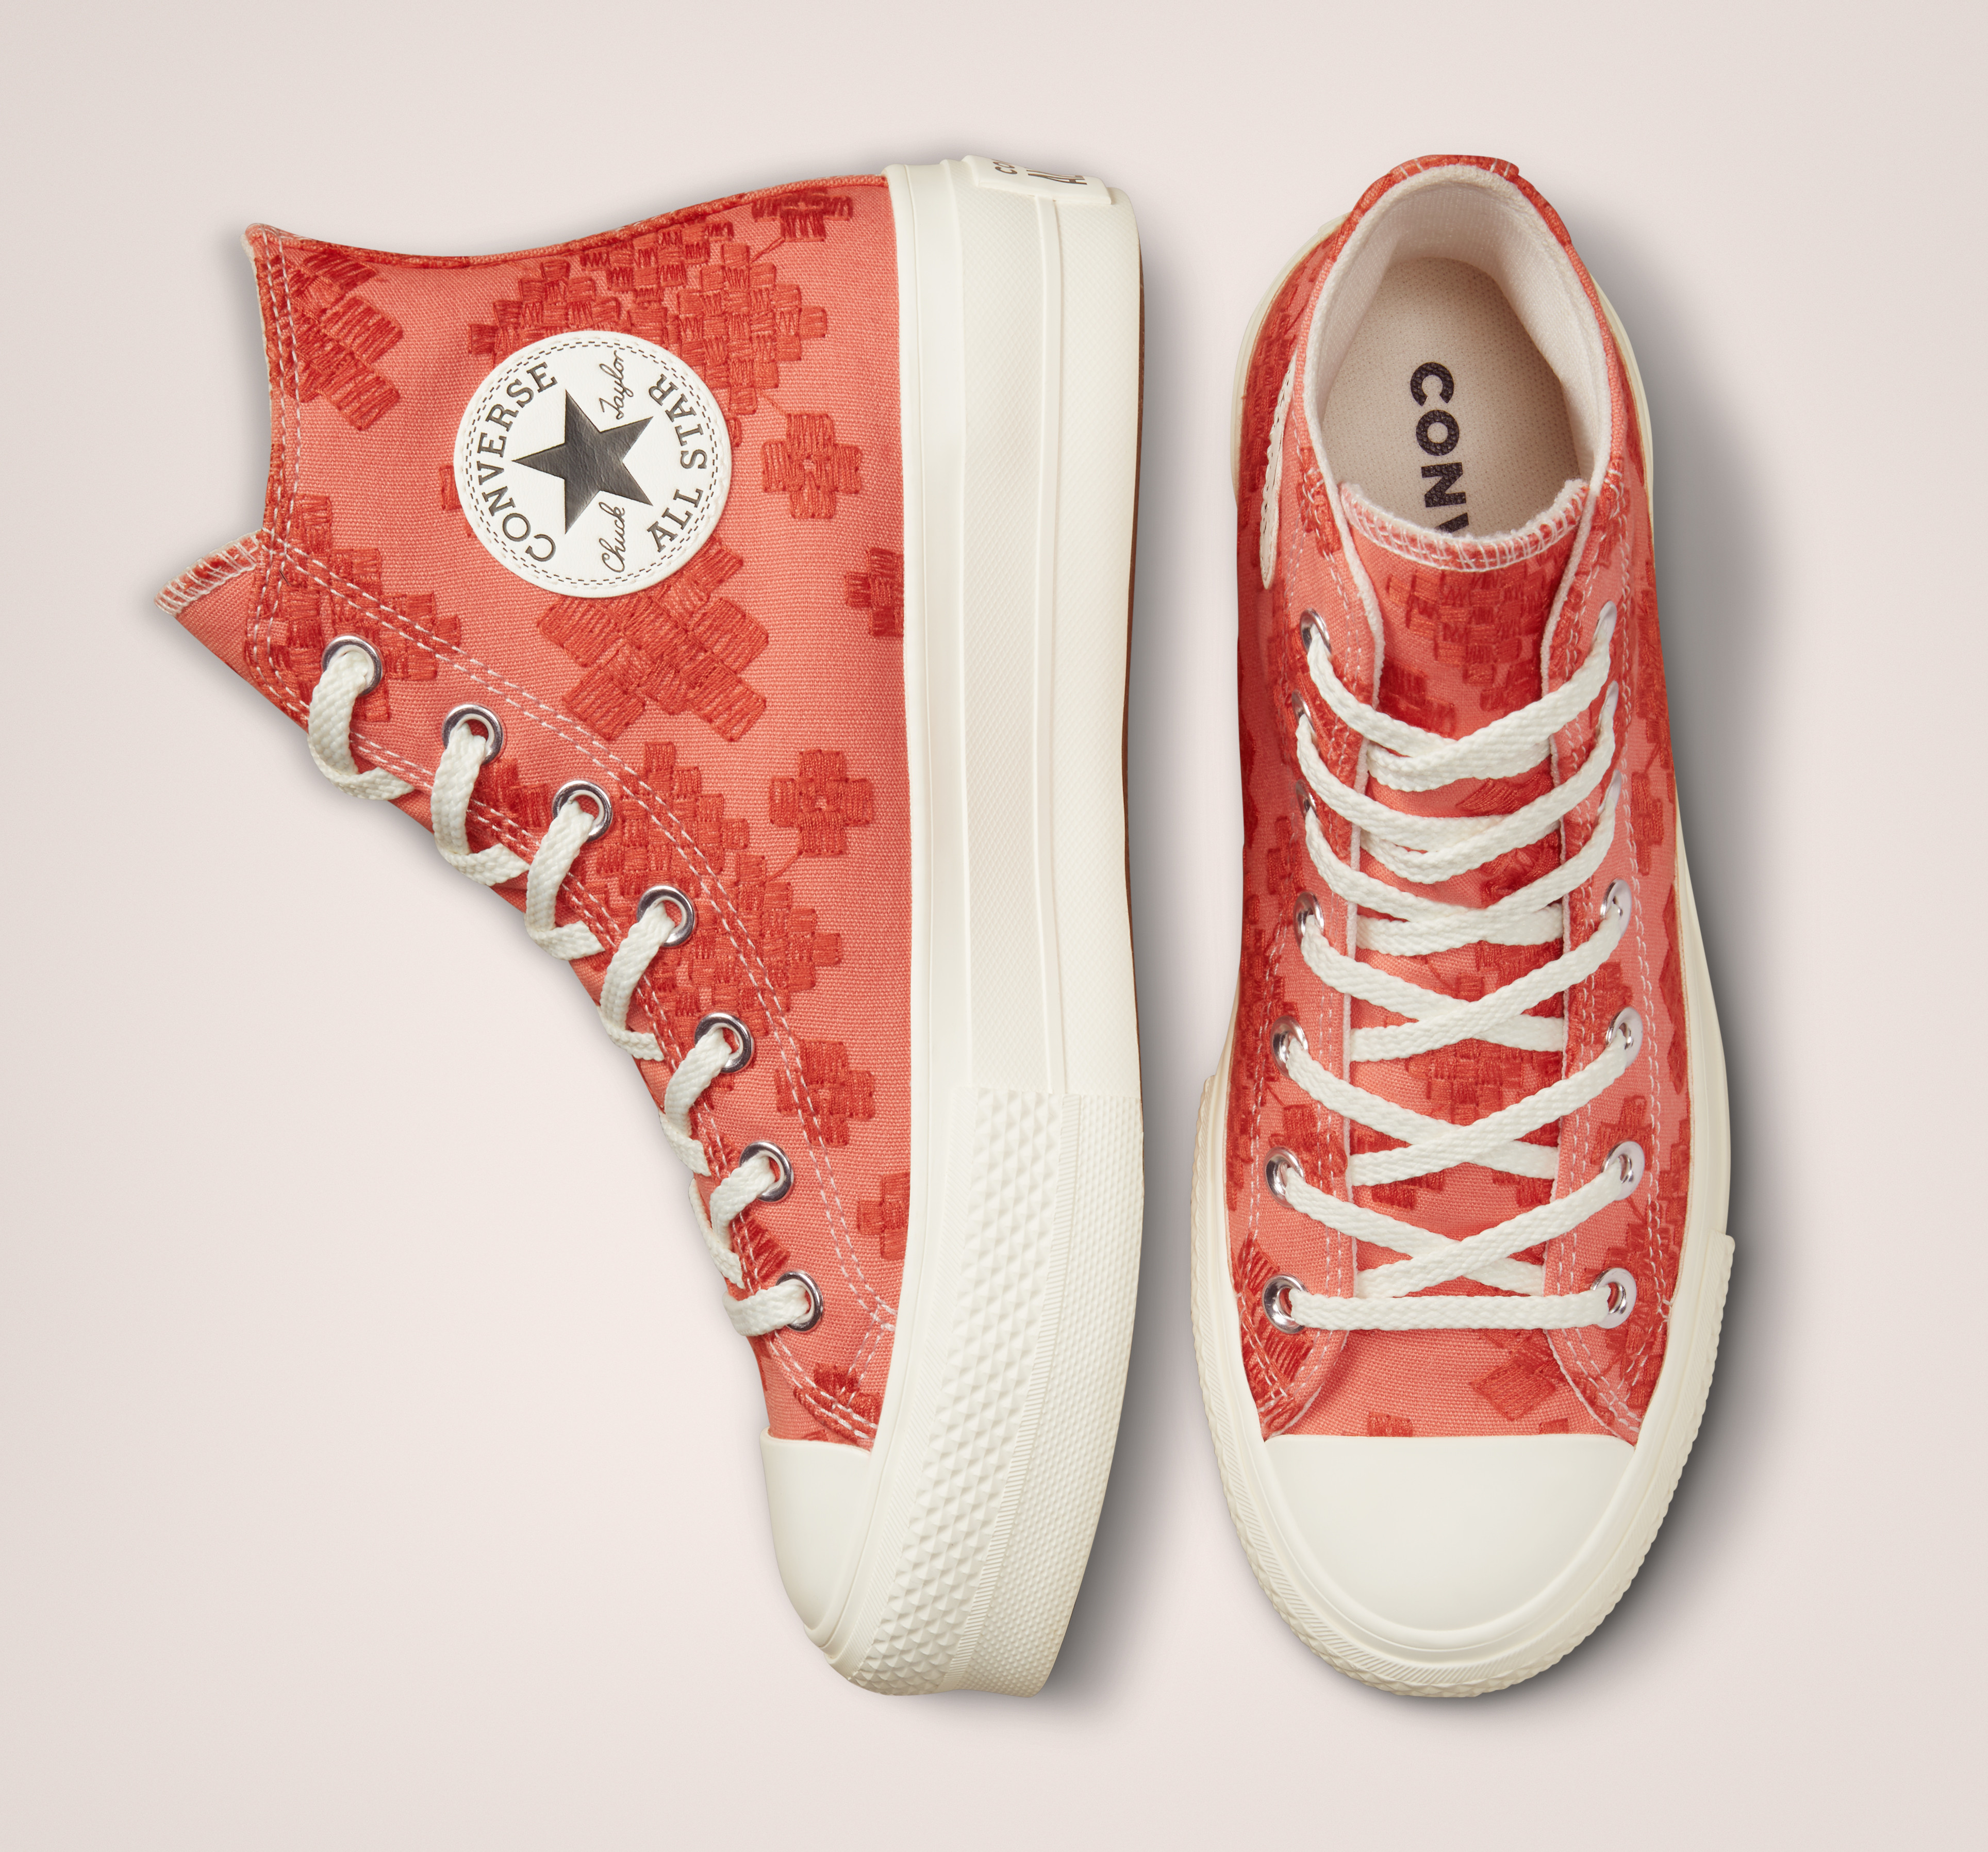 Converse Chuck Taylor All Star Lift Canvas Pink/red